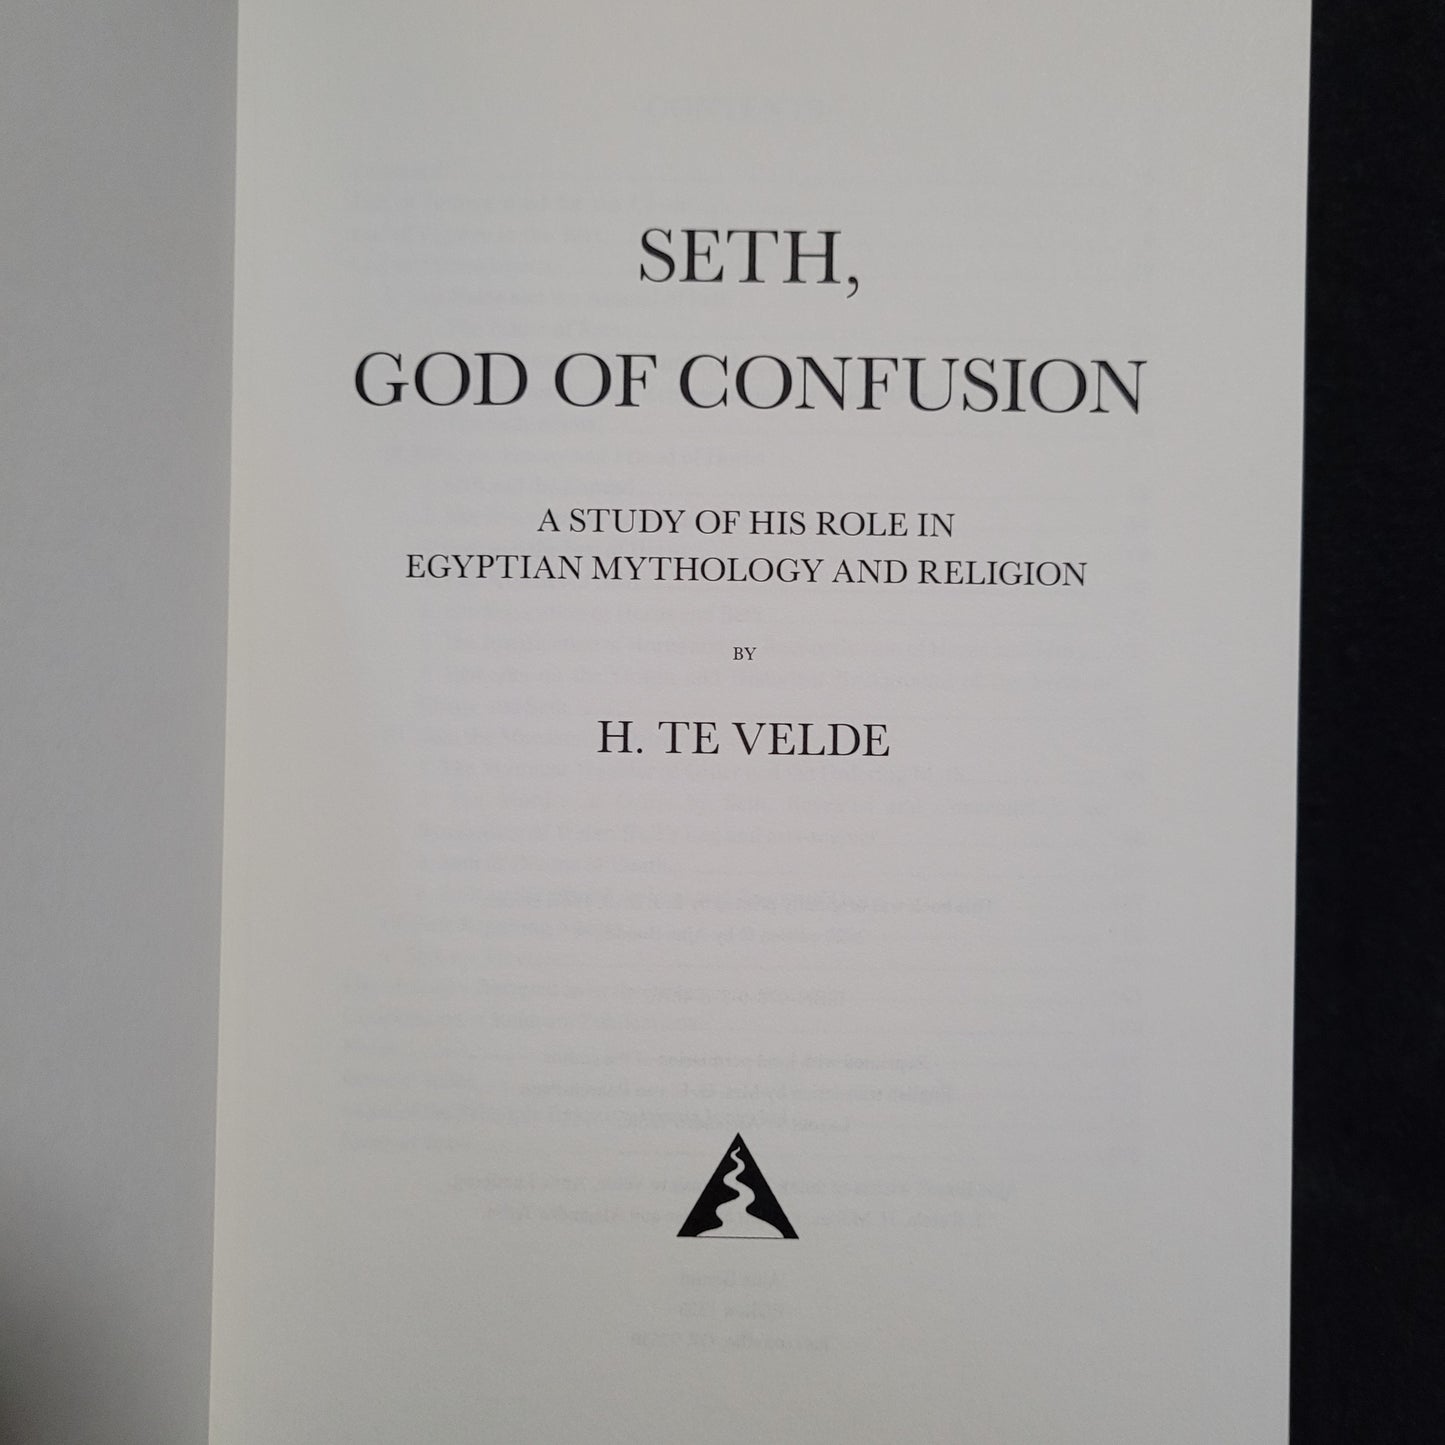 Seth, God of Confusion: A Study of His Role in Egyptian Mythology and Religion by Herman te Velde (Ajna Bound, 2020) Hardcover